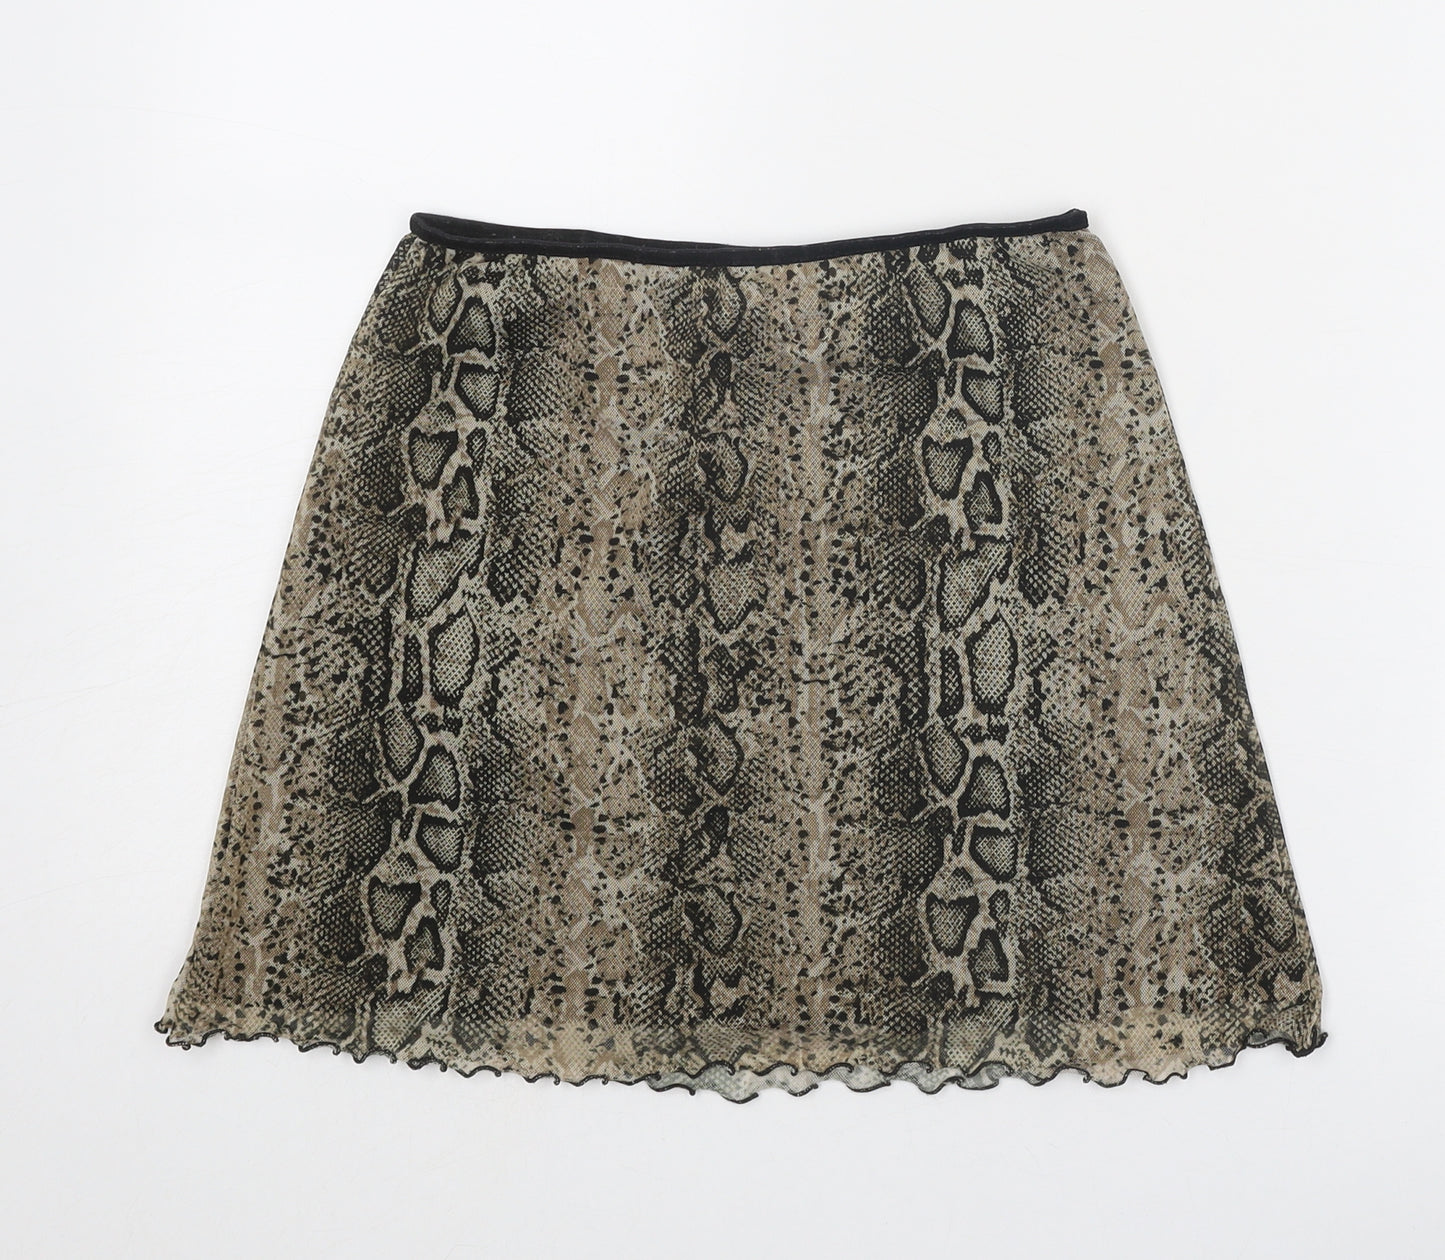 Urban Outfitters Womens Beige Animal Print Polyester A-Line Skirt Size S - Snakeskin Pattern